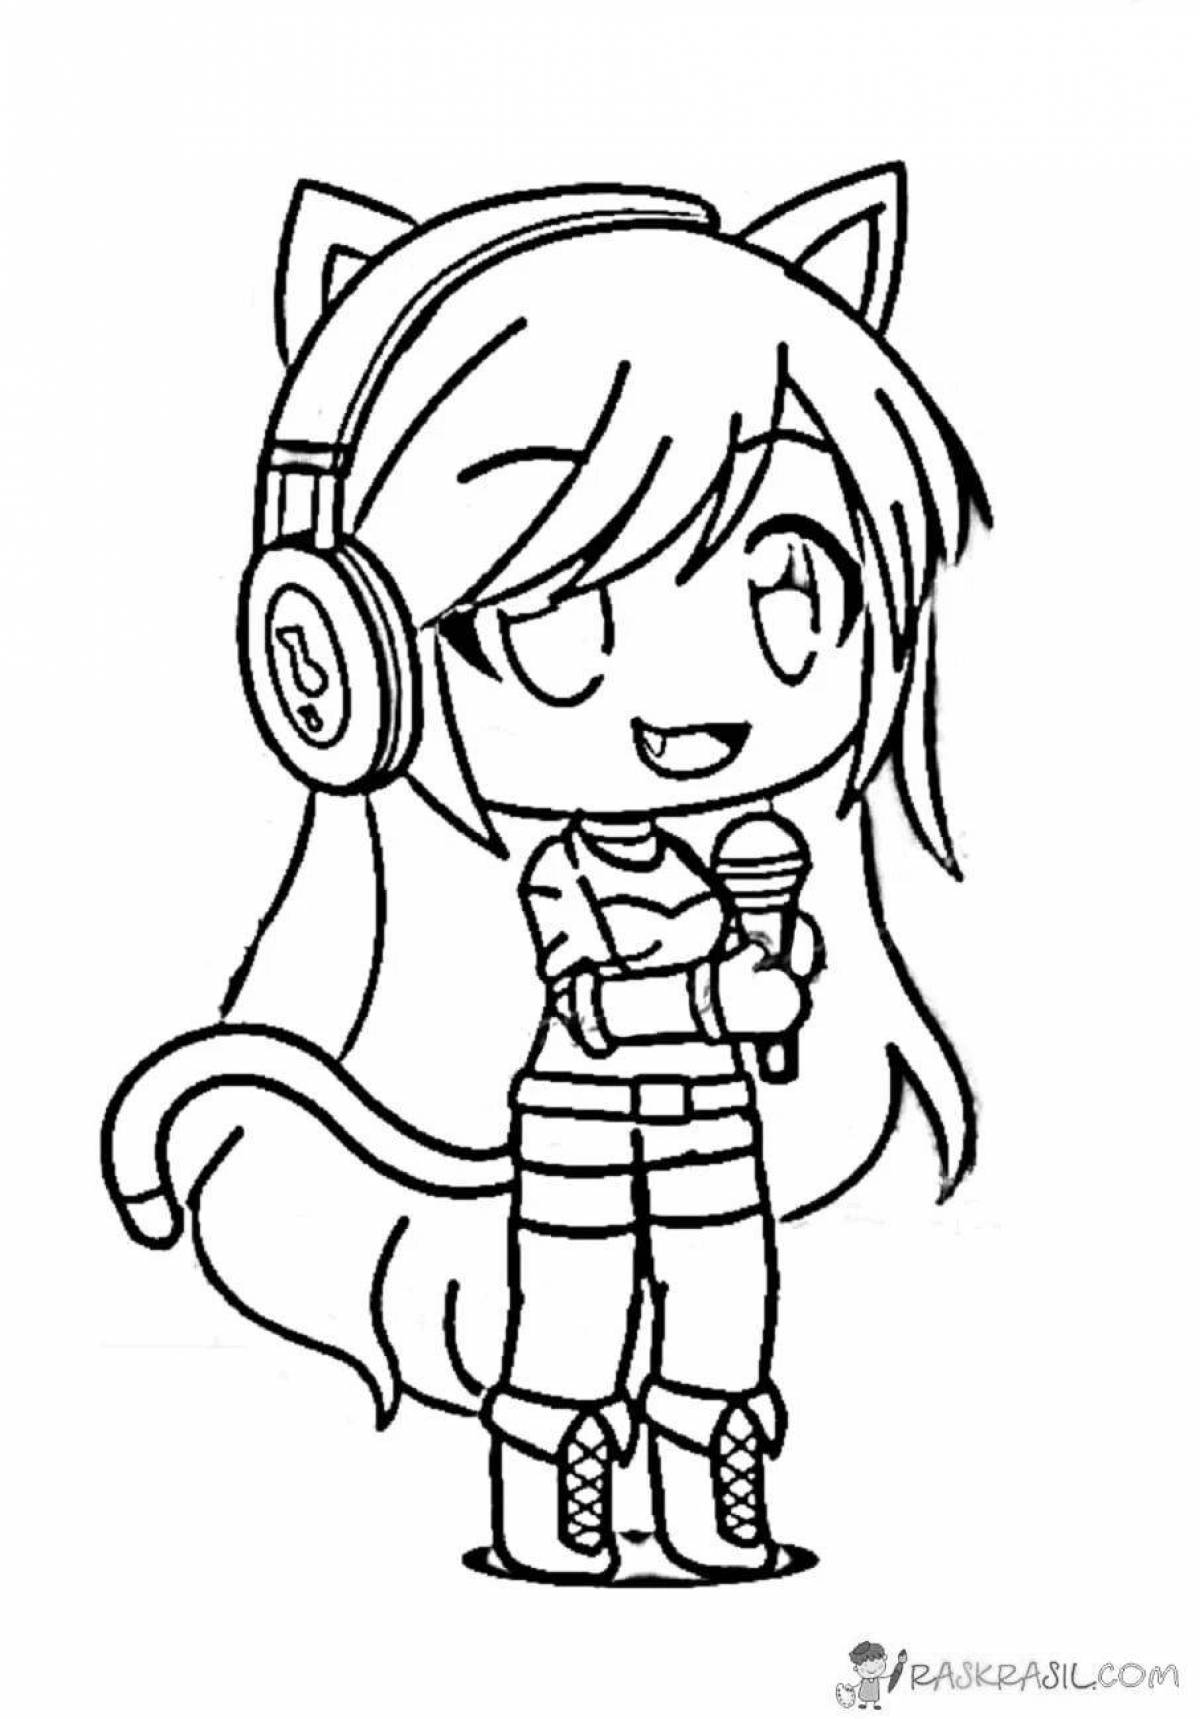 Cute skins roblox girls coloring page